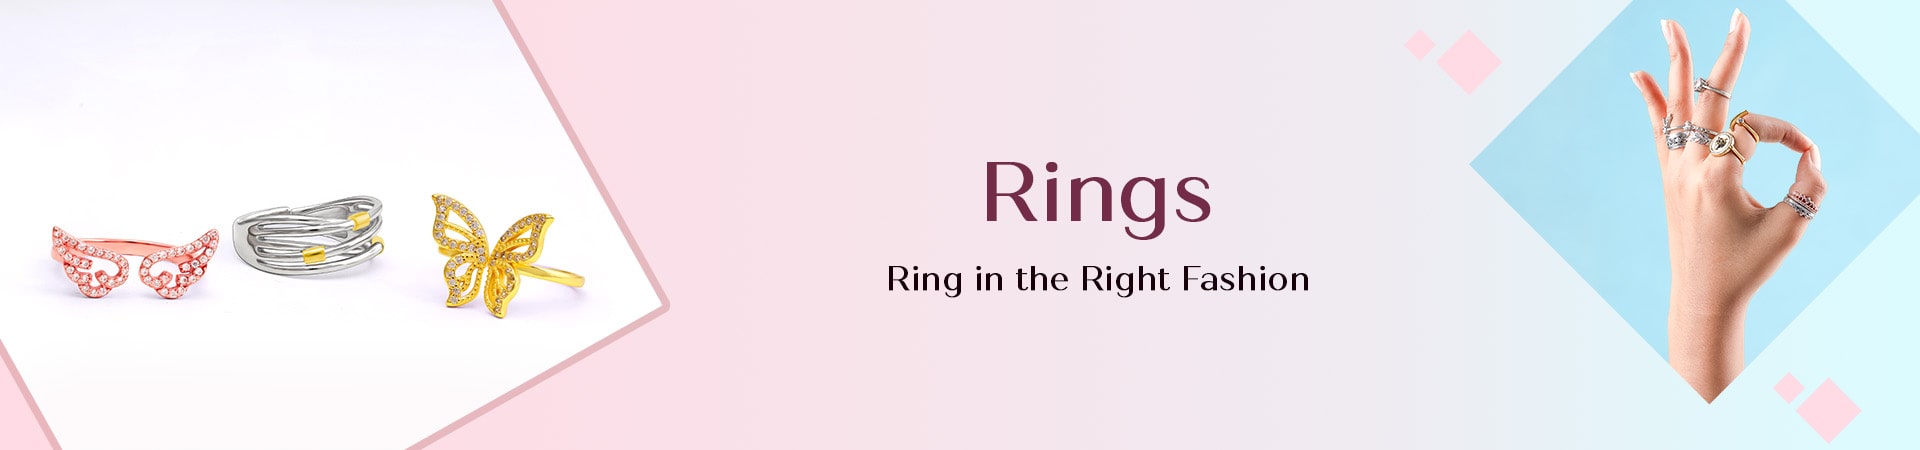 ring designs, jewellery rings, online ring shopping, fashion rings, silver  ring price, sterling silver jewellery online – CLARA